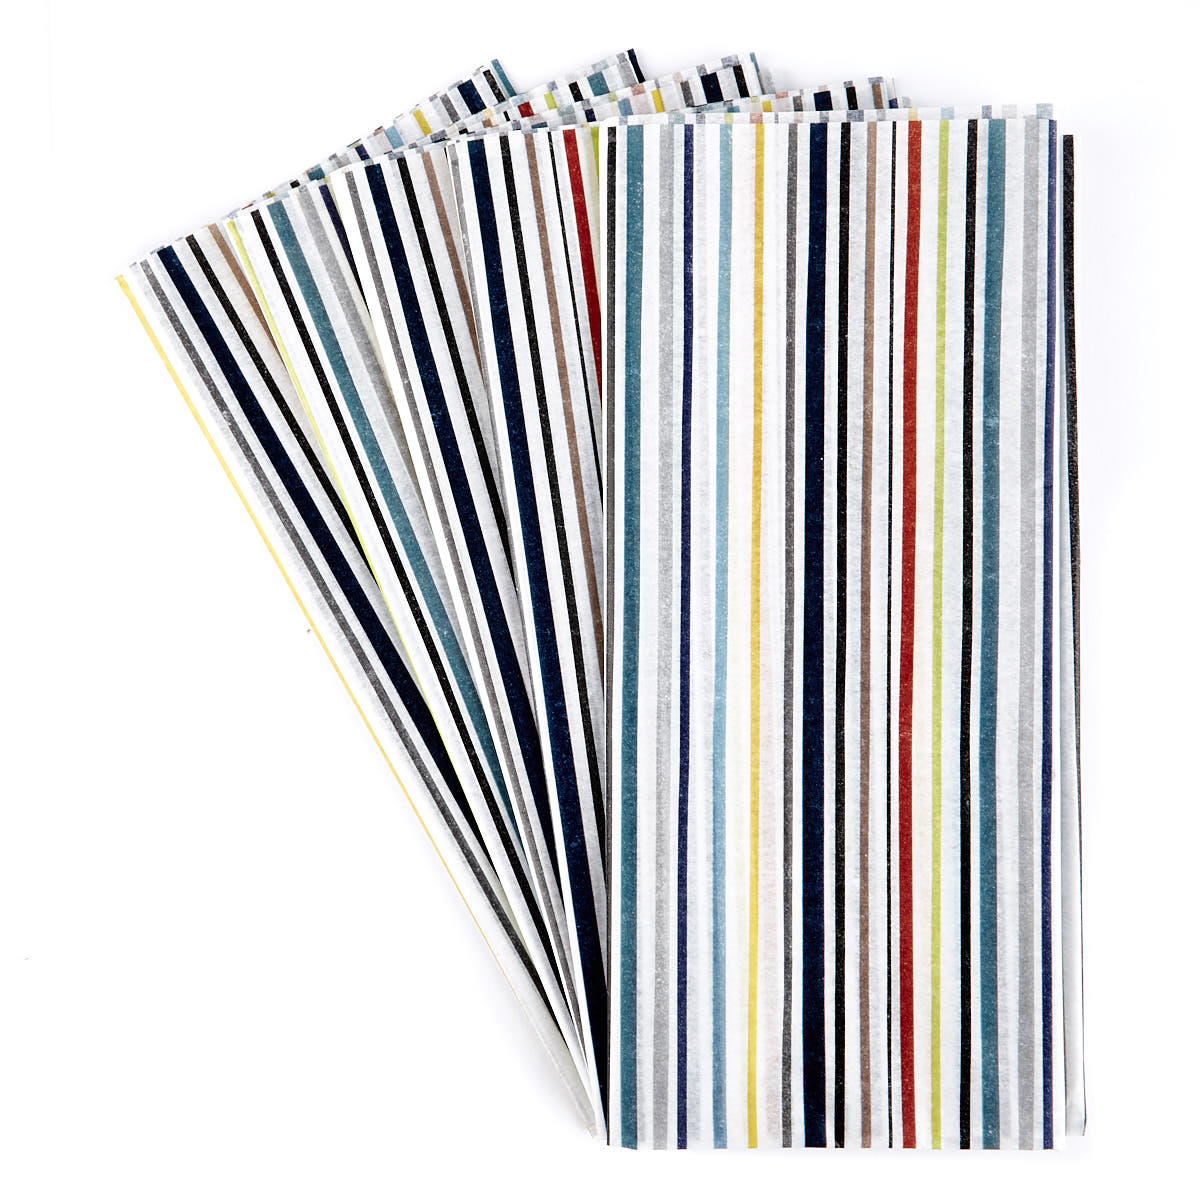 Striped Tissue Paper - 7 Sheets